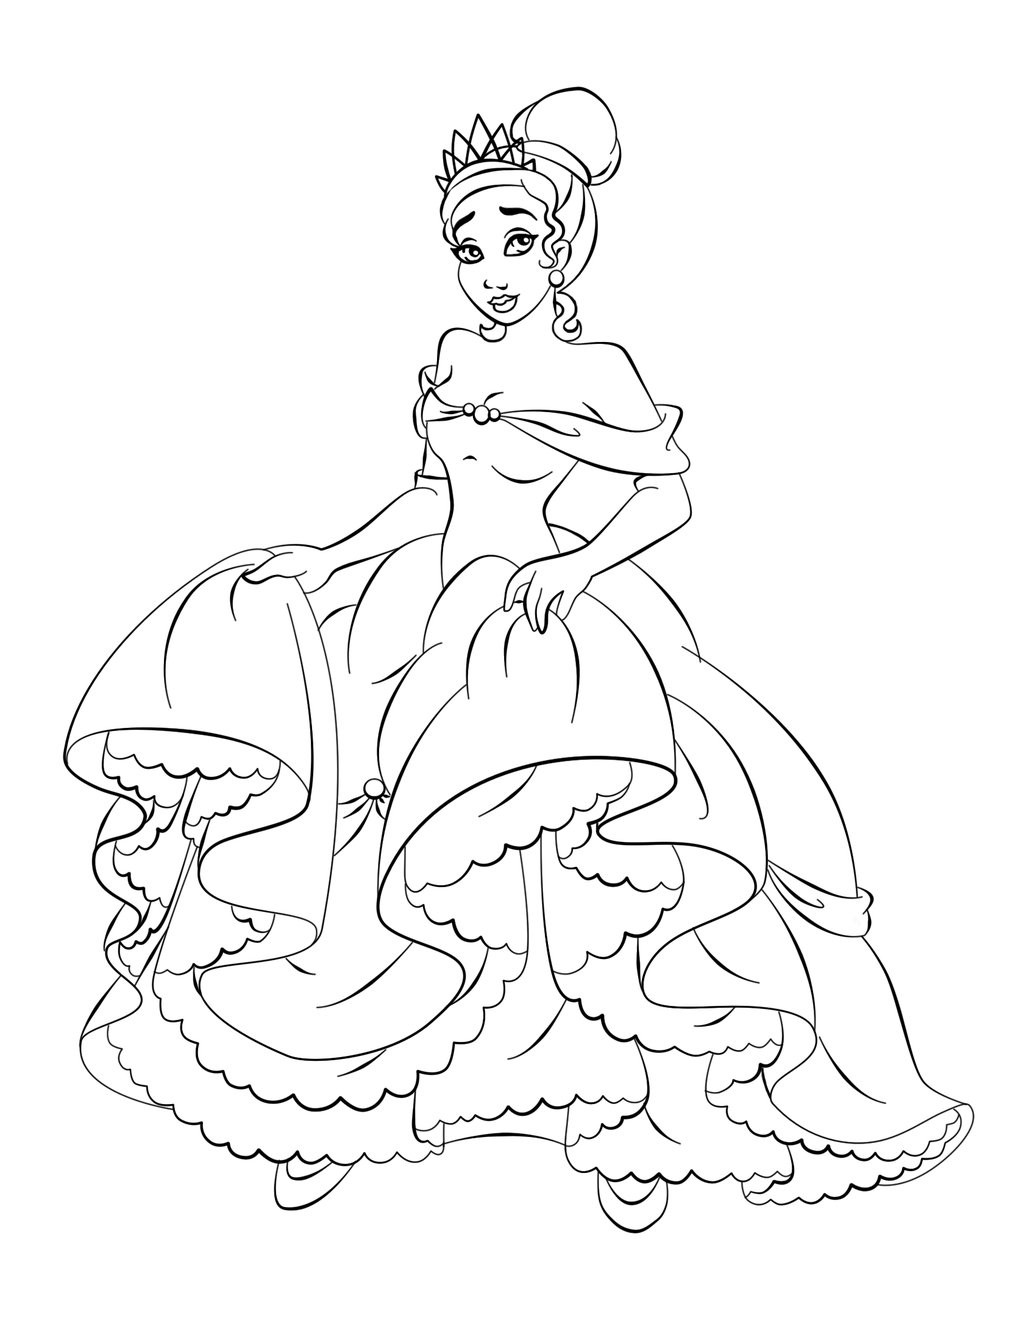 Princess Coloring Pages For Girls
 Disney Princess Tiana Coloring Pages To Girls